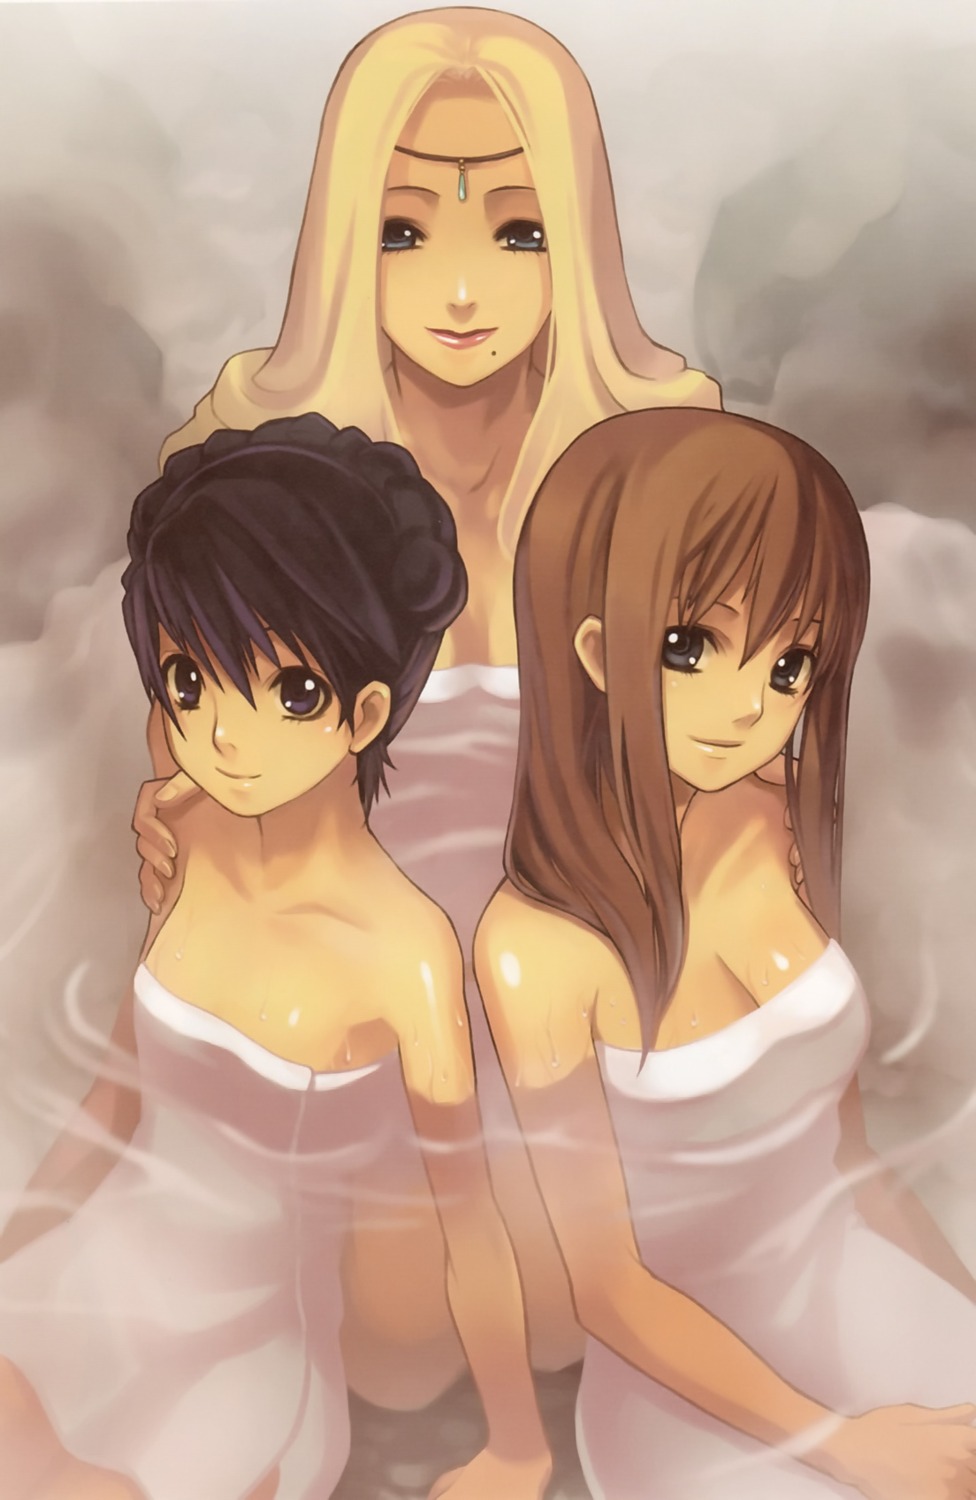 ar_tonelico aurica_nestmile claire_branch misha_arsellec_lune nagi_ryou onsen towel